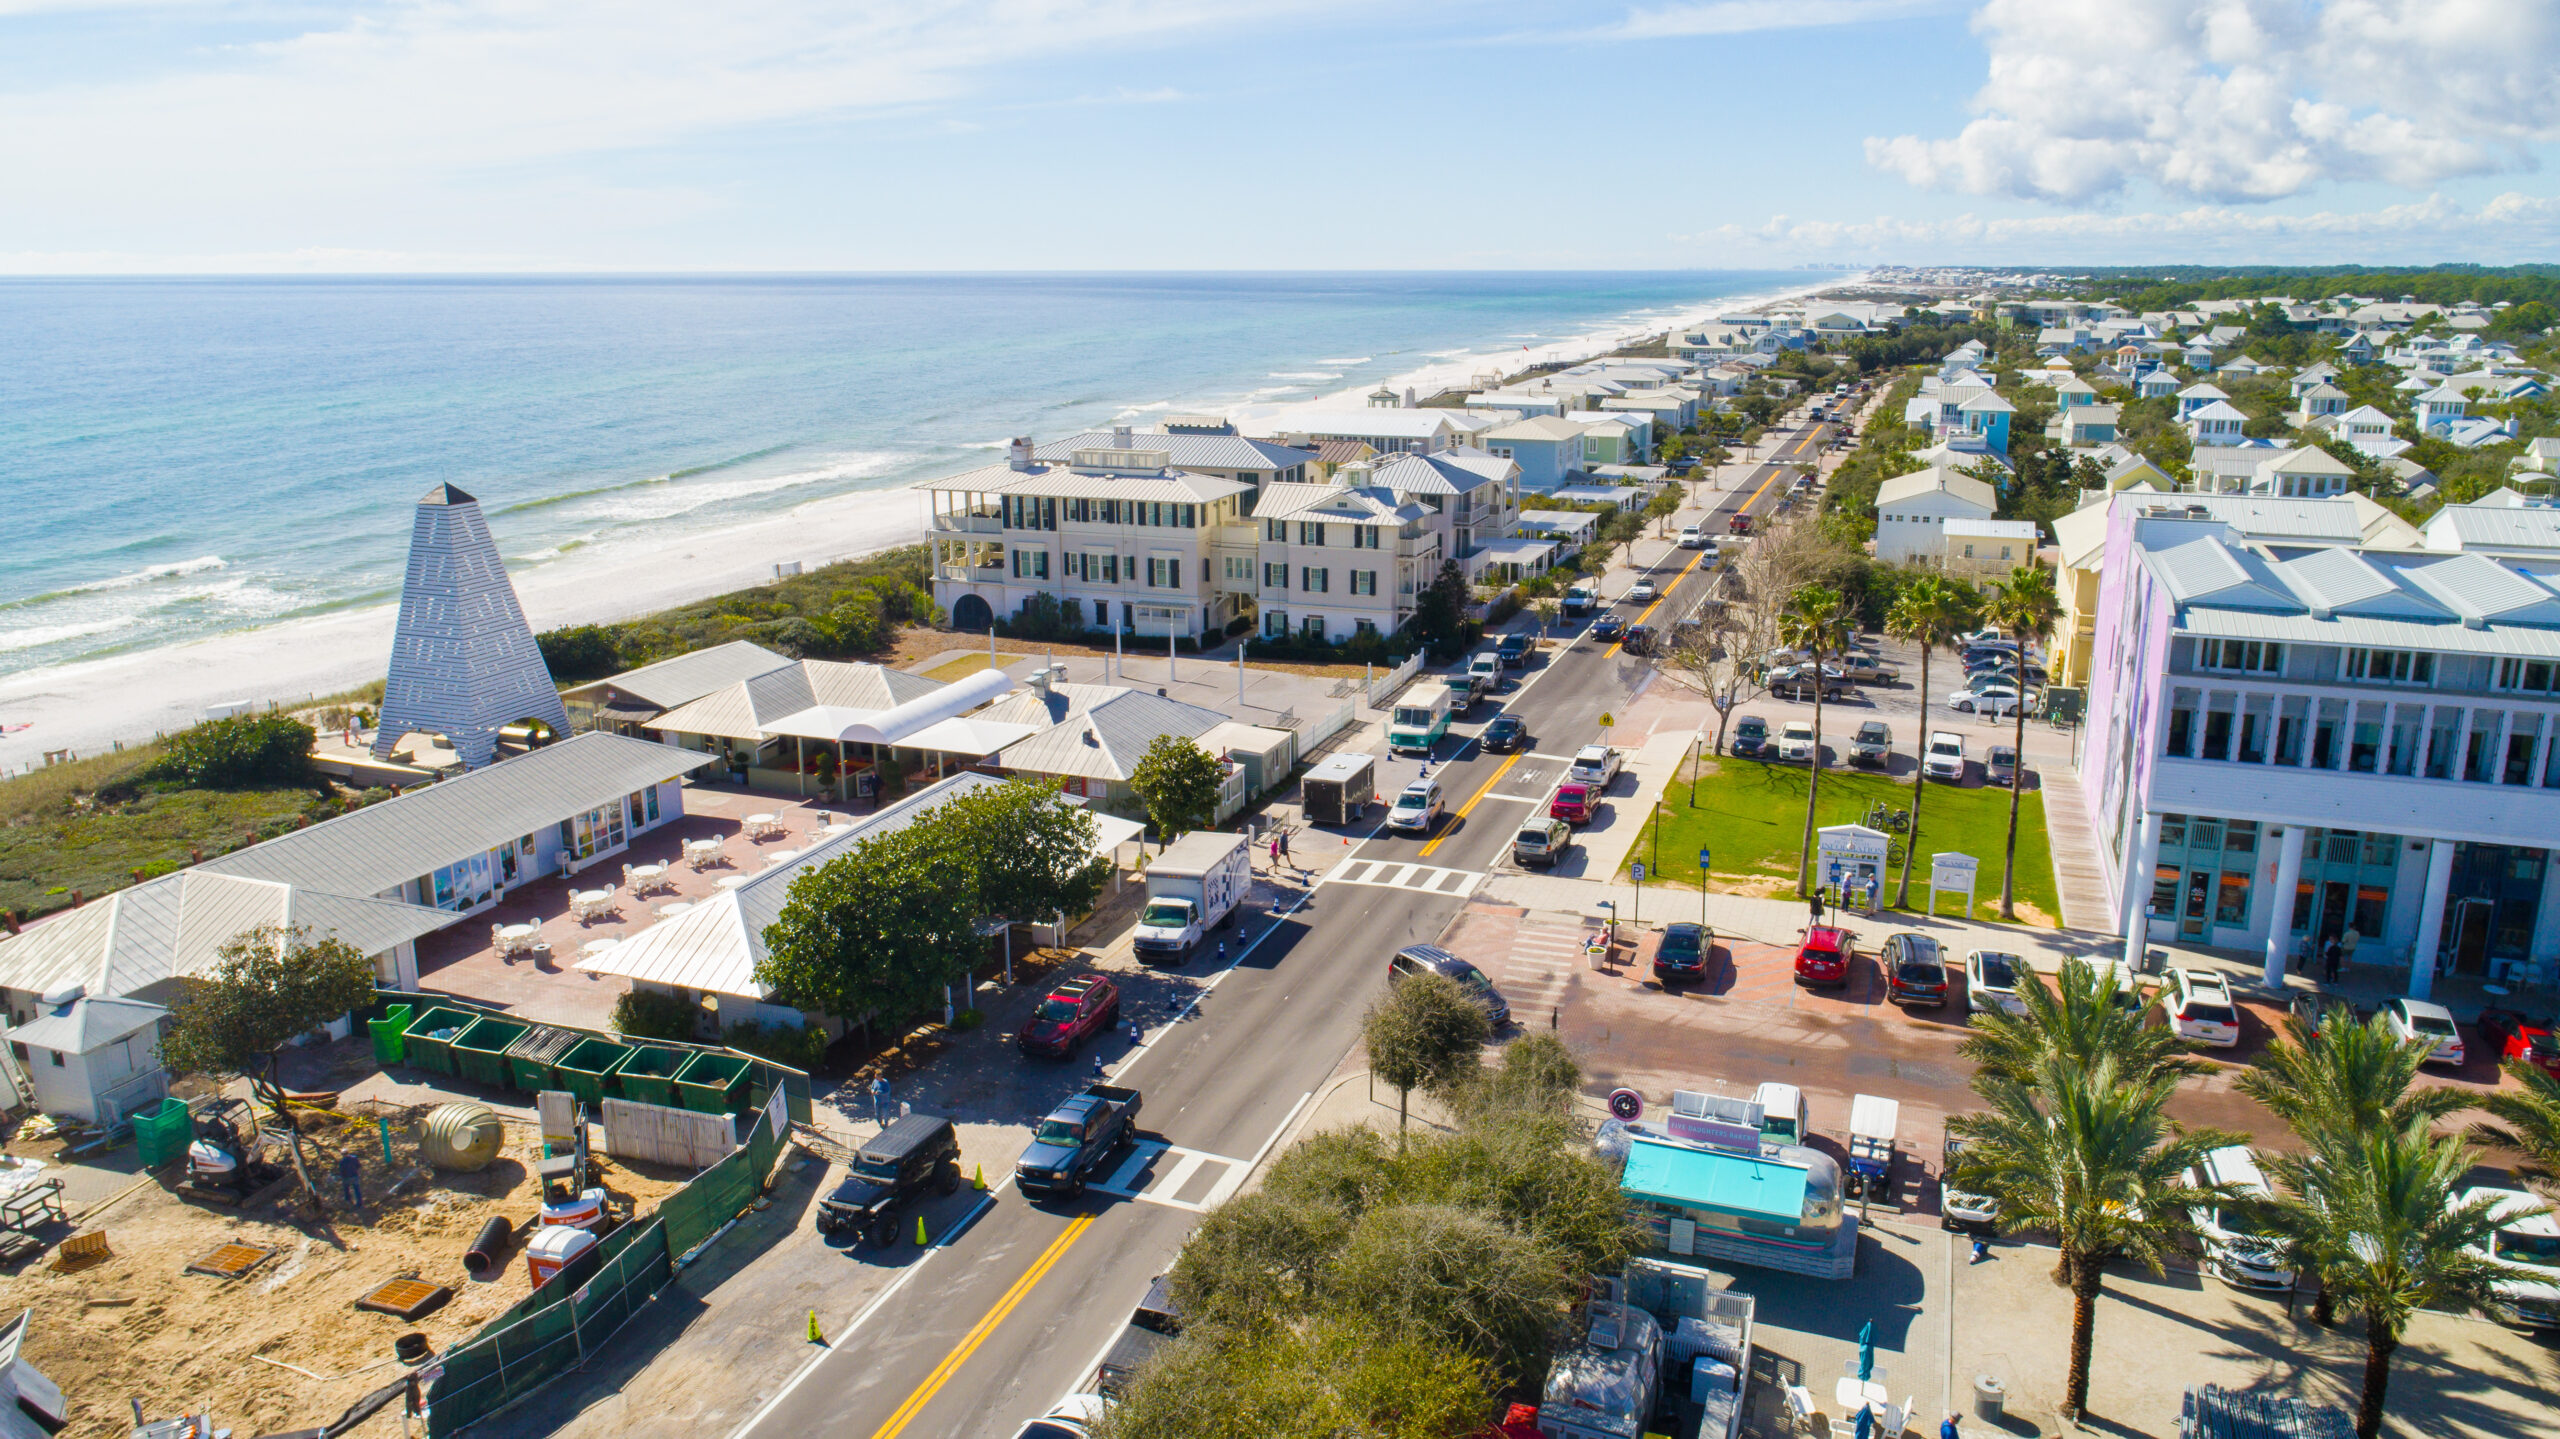 6 Of The Most Enchanting Small Towns Along Florida’s Emerald Coast